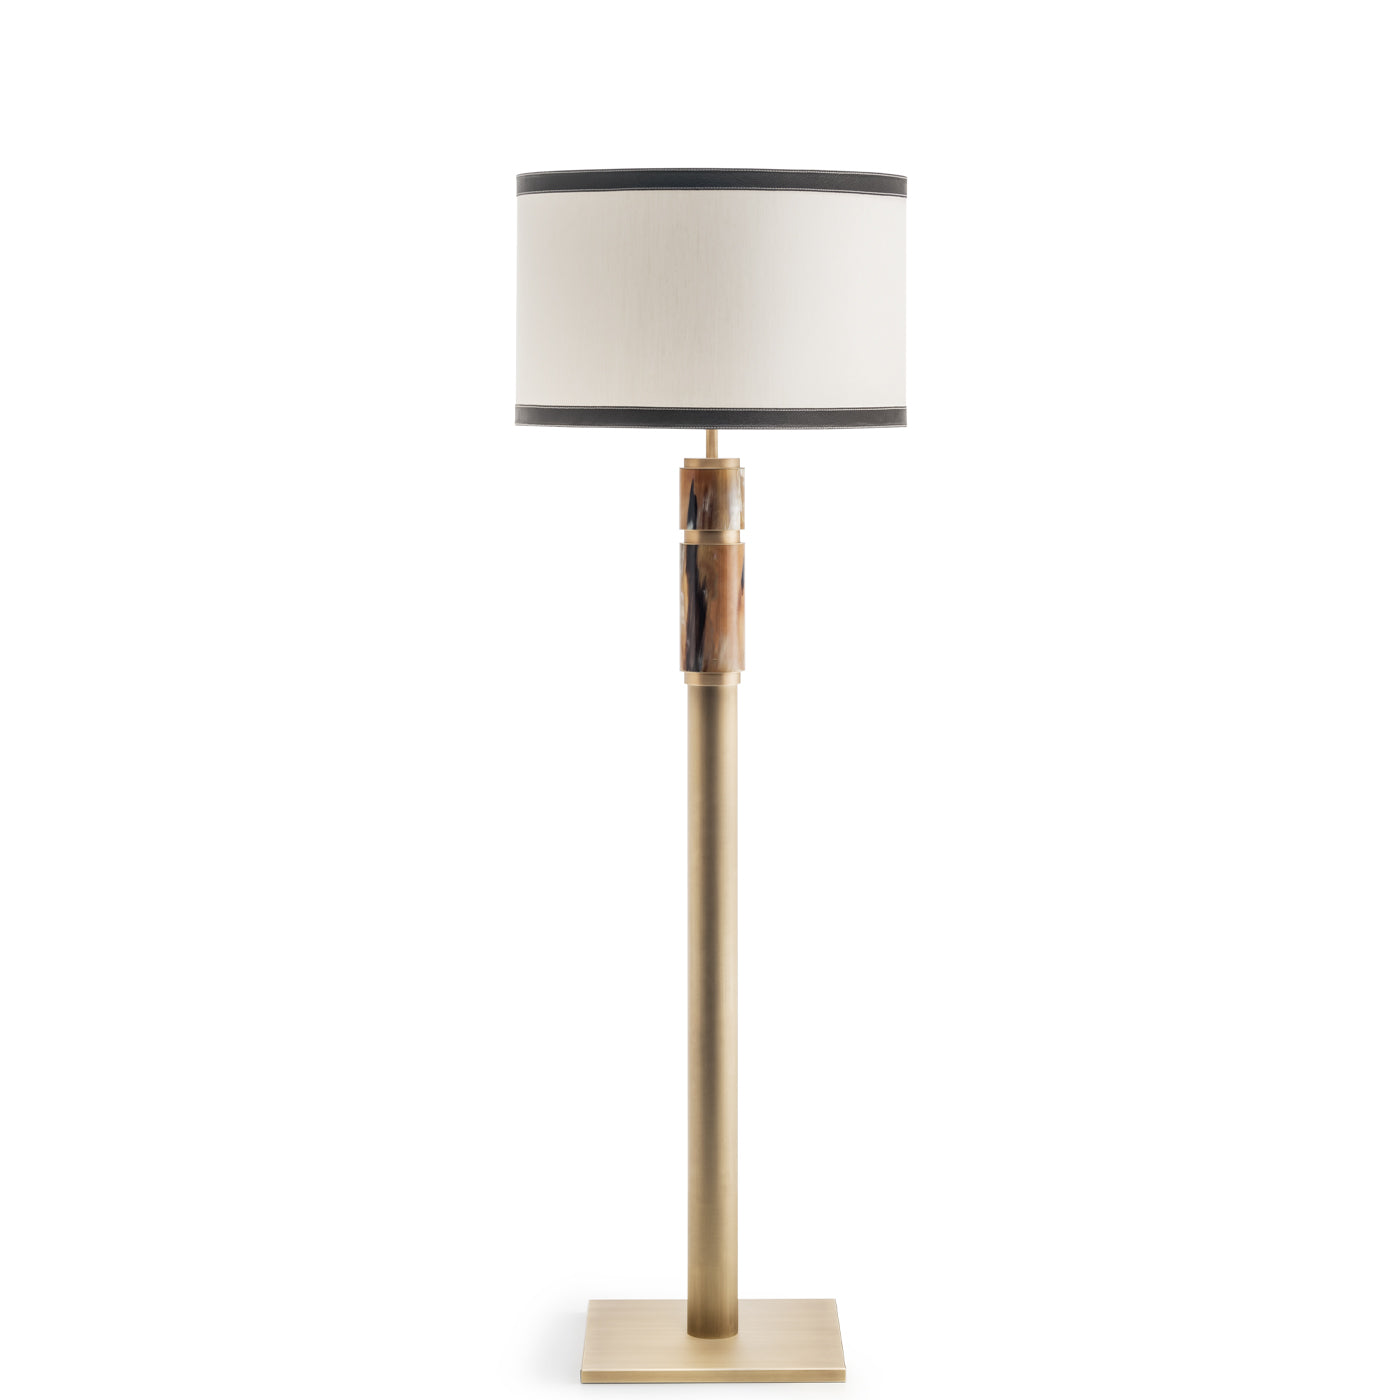 Arcahorn Babel Floor Lamp | Horn and Satin Brass | Ivory Shantung Lampshade with Dark Brown Tosca Leather Trim | Ideal for Yacht Decor | Discover Luxury Lighting at 2Jour Concierge, #1 luxury high-end gift & lifestyle shop